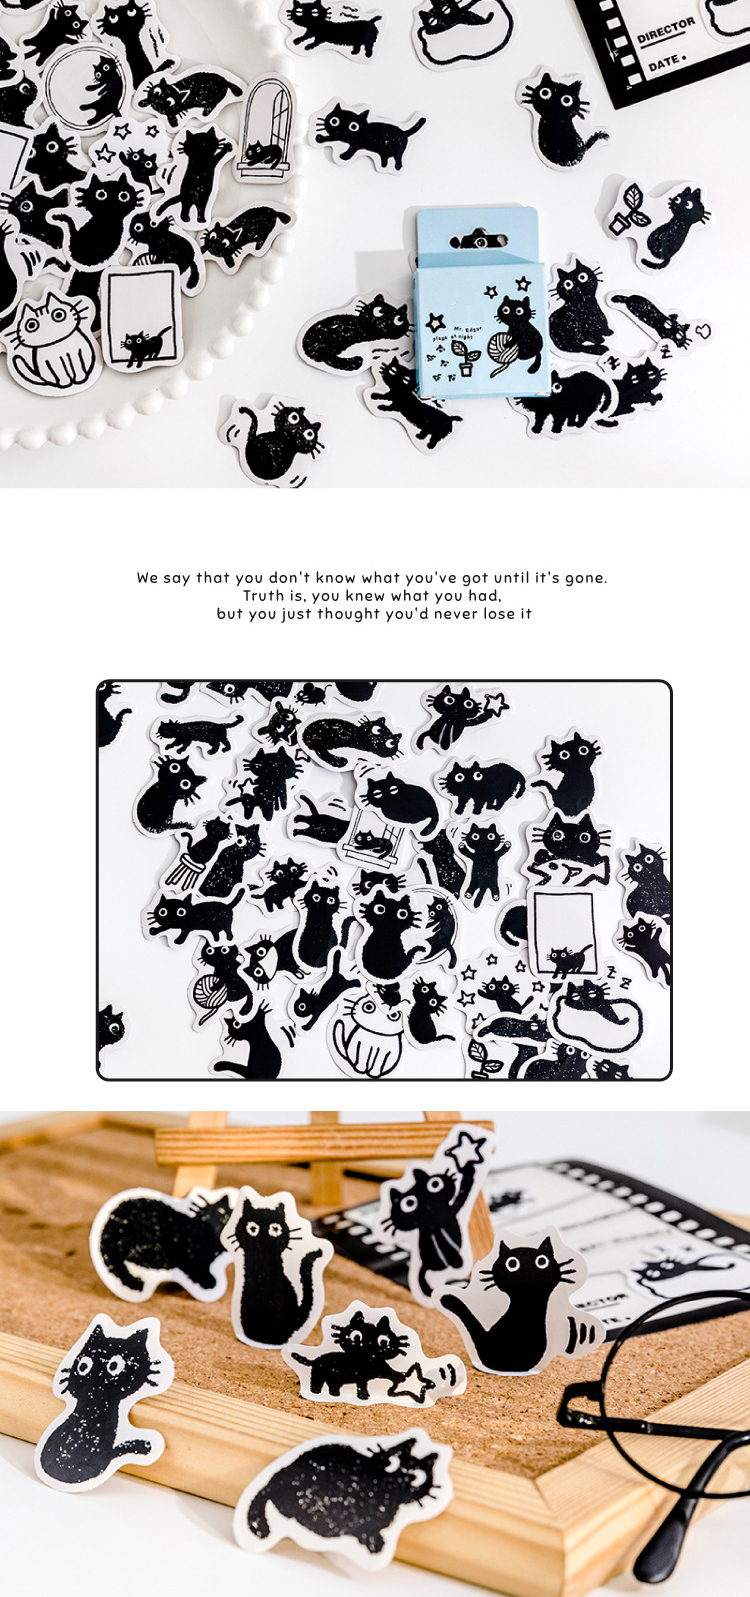 90 Pieces Kawaii Cat Mini Size Sticker for journaling,Small DIY Decoration Cute Stickers for Phone Case Laptop Scrapbook Suitcase Diary Notebooks